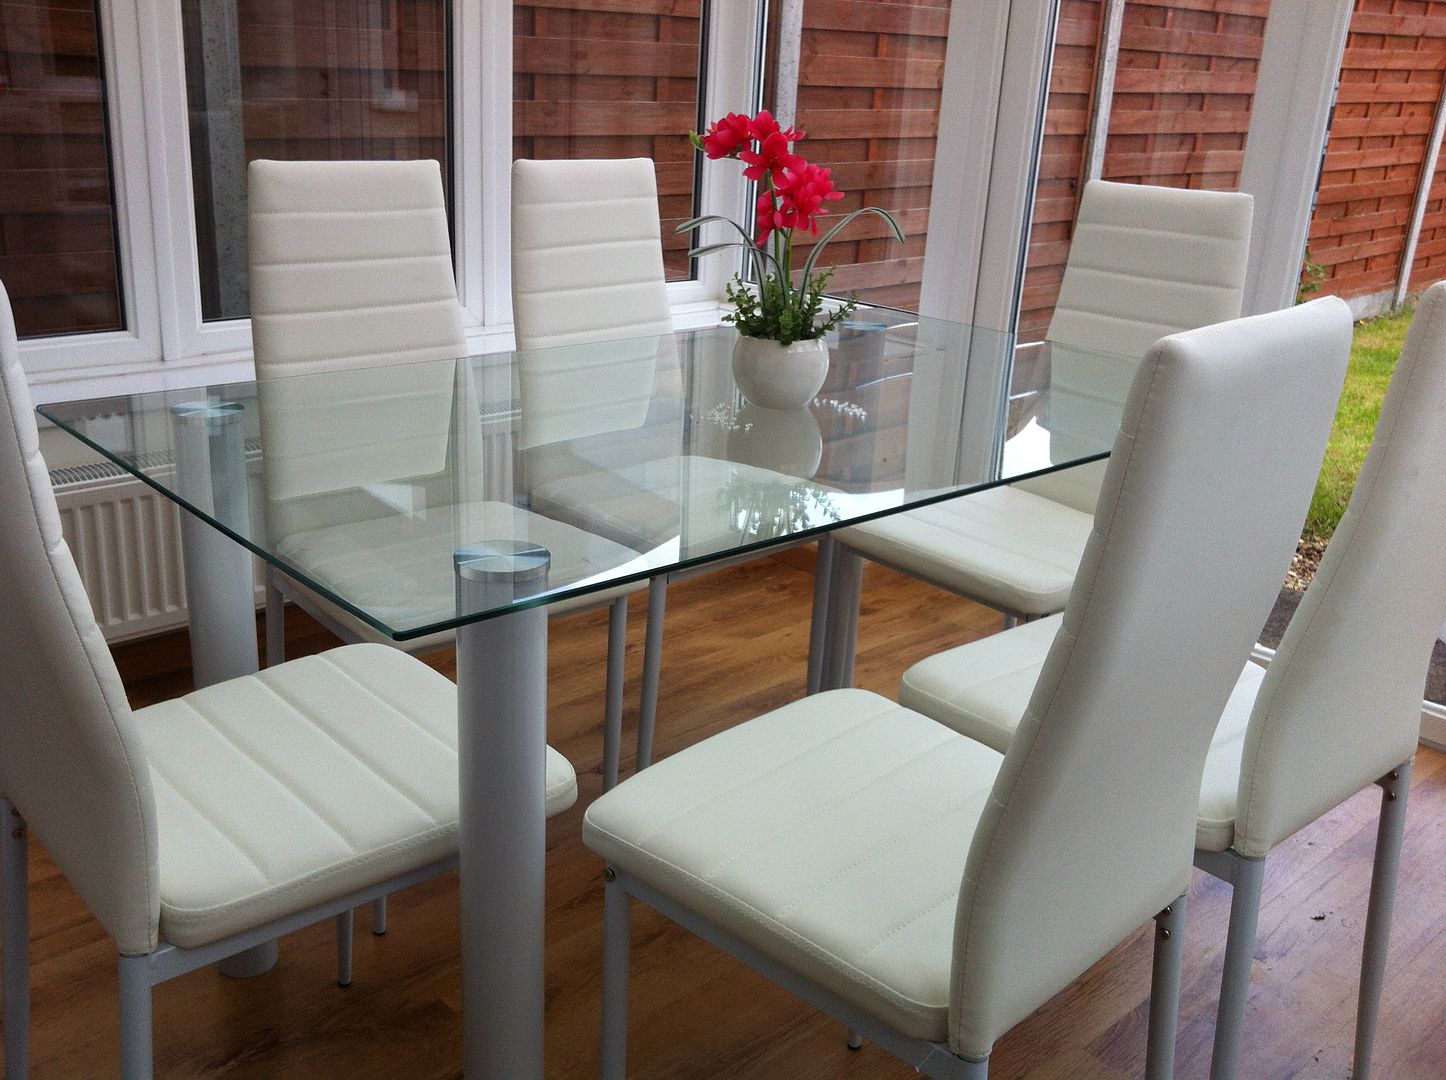 STUNNING GLASS DINING TABLE SET AND WITH 4 OR 6 FAUX LEATHER CHAIRS